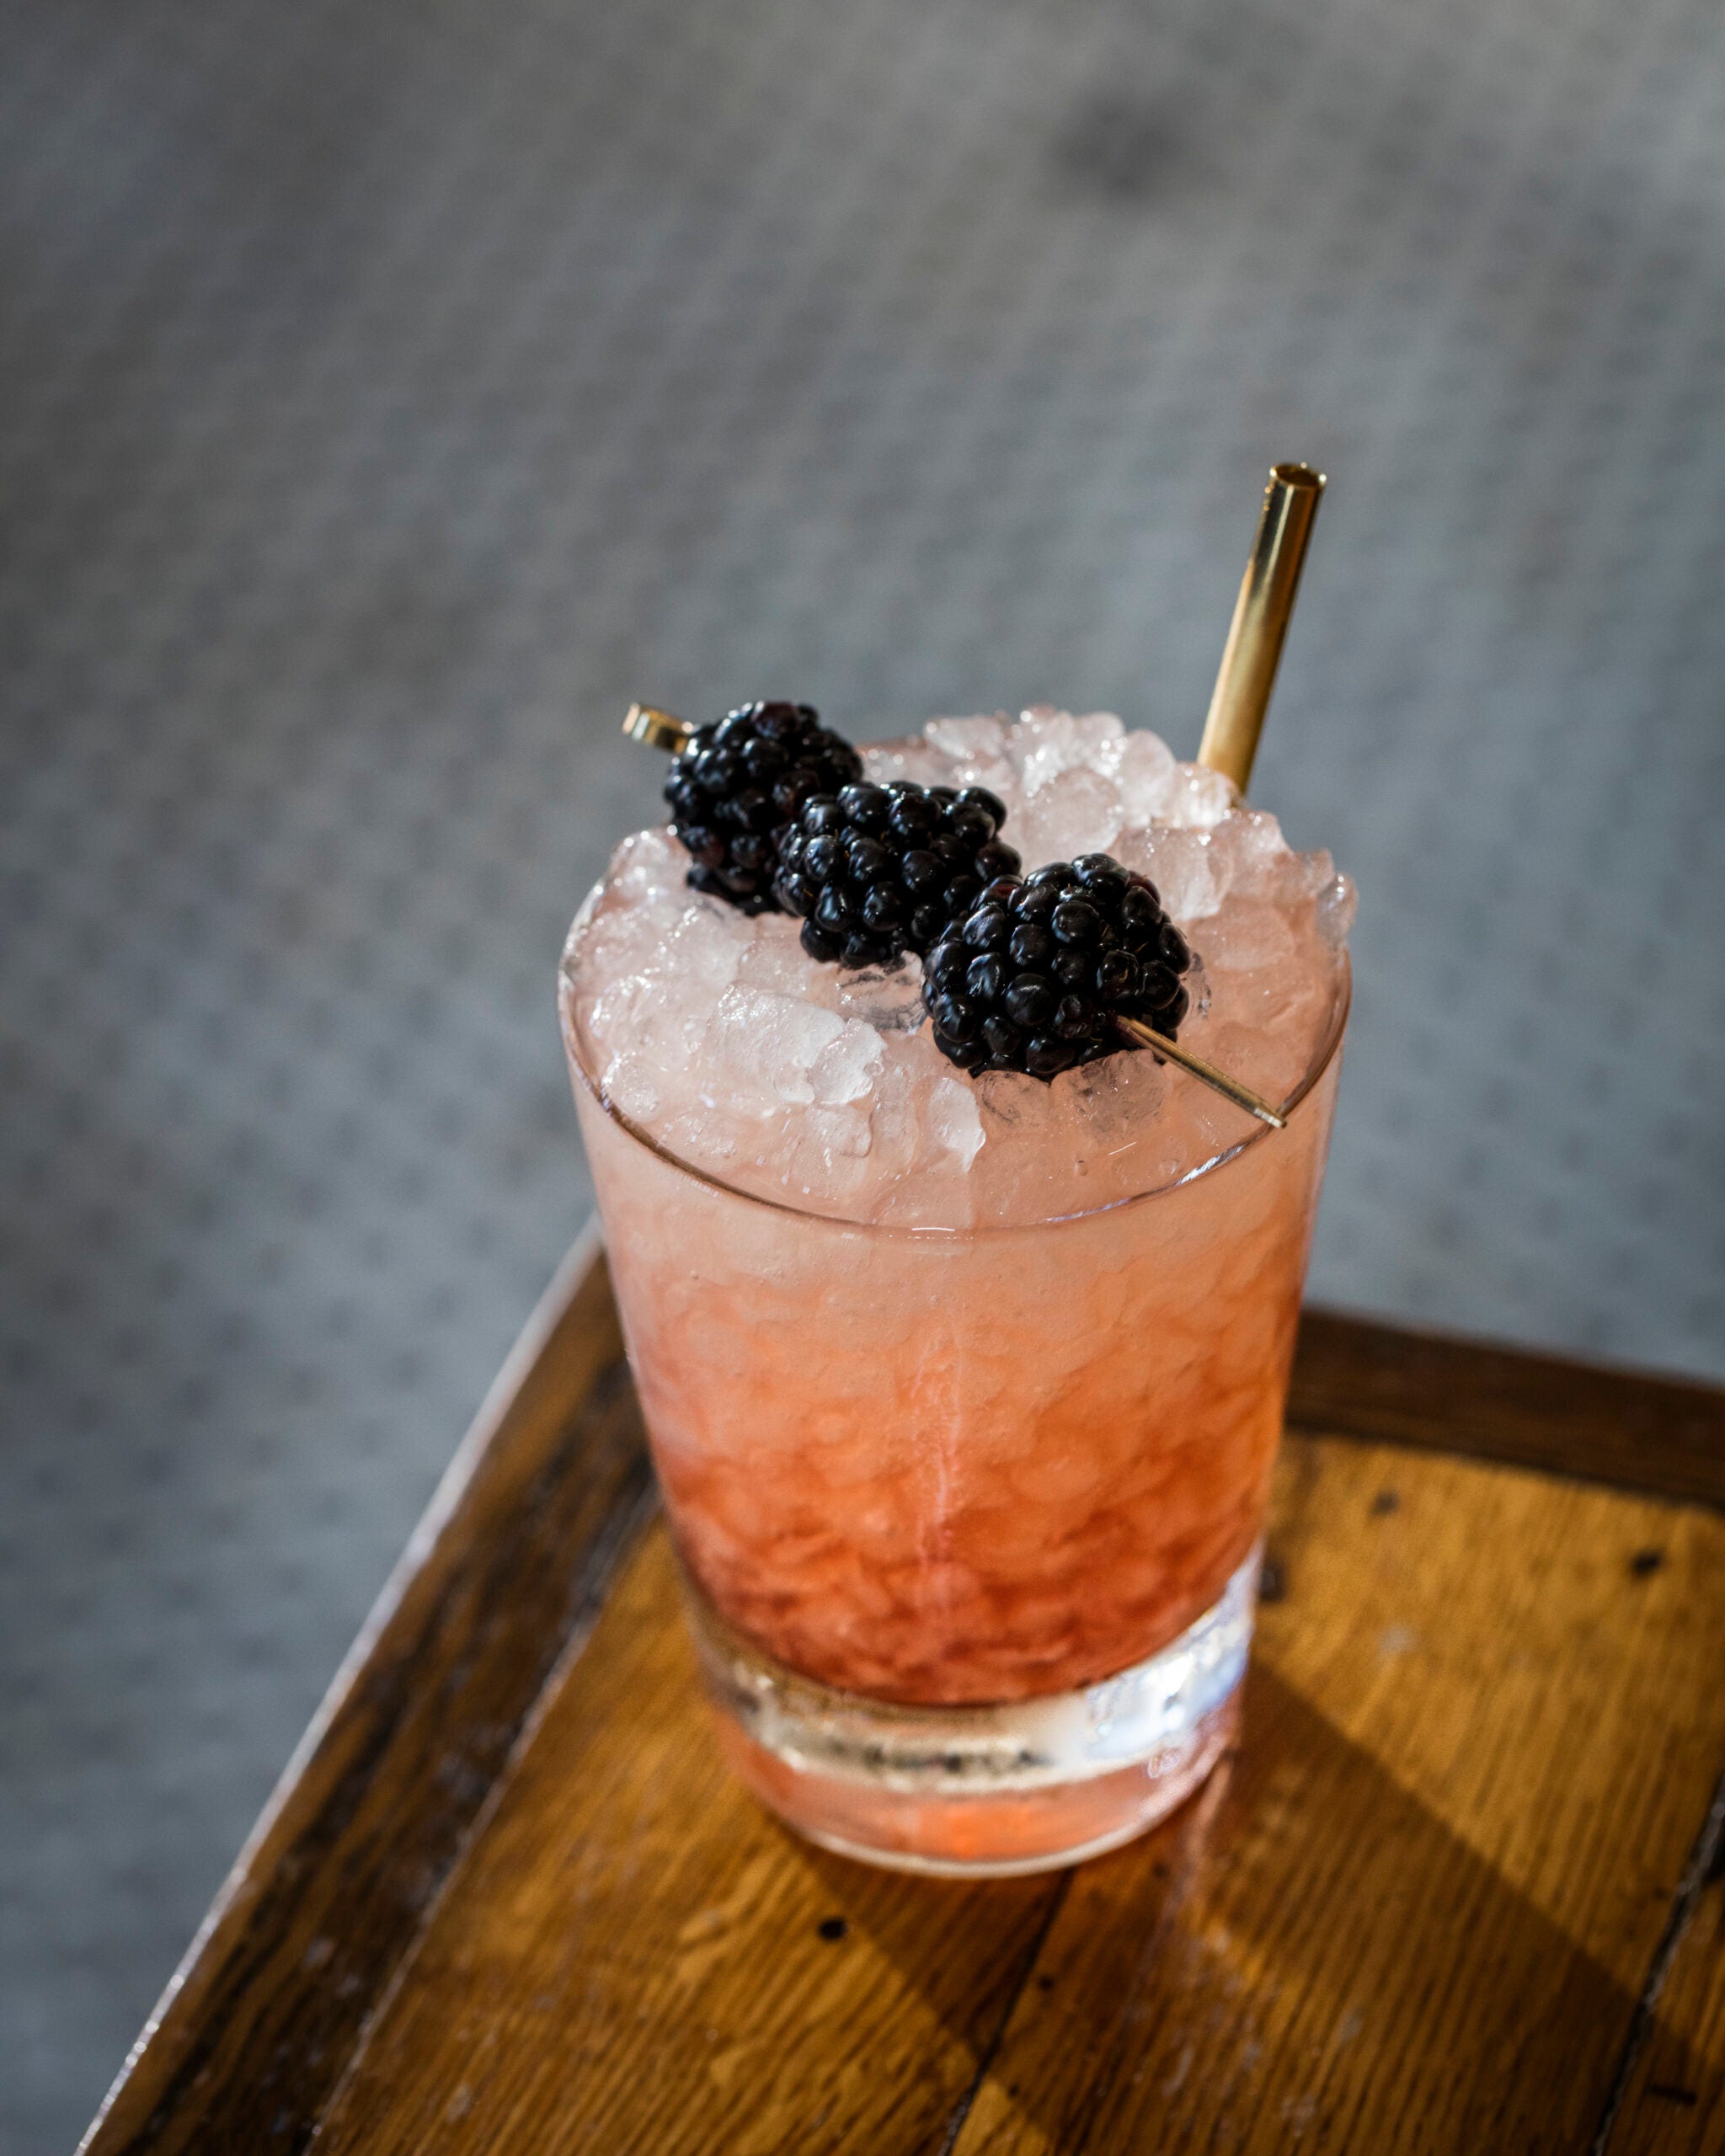 Bramble cocktail topped with blackberries.